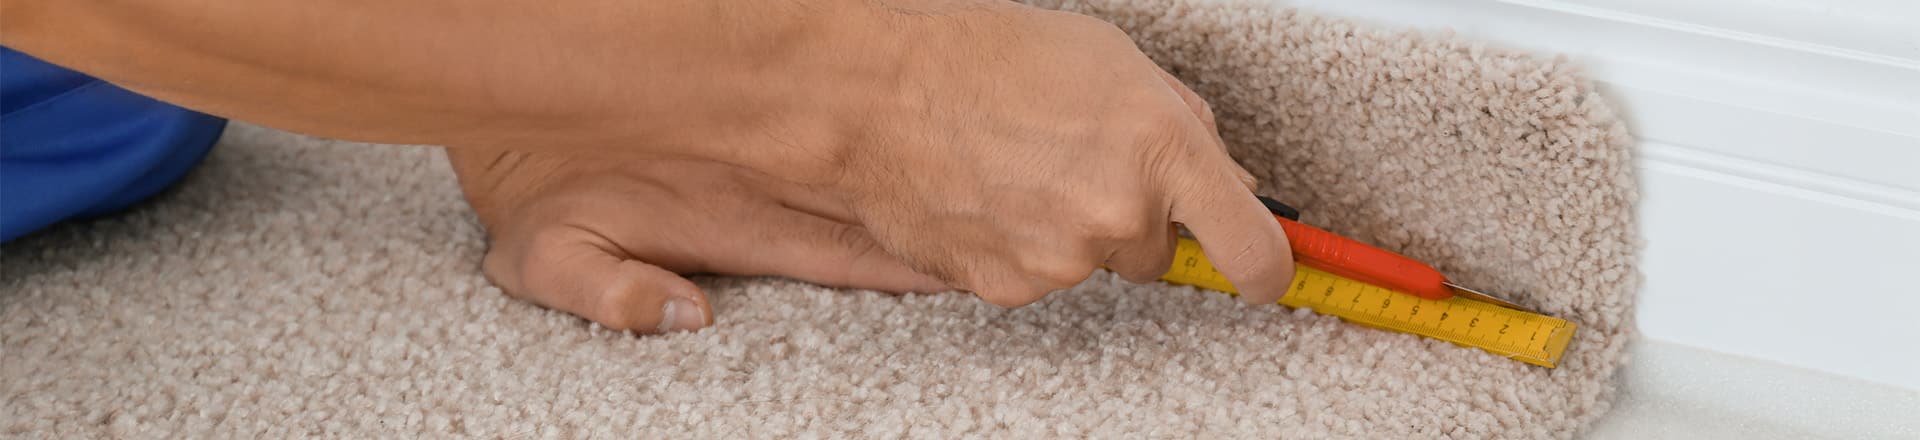 11The Dangers of DIY Carpet Repairs and Why You Should Call Professionals